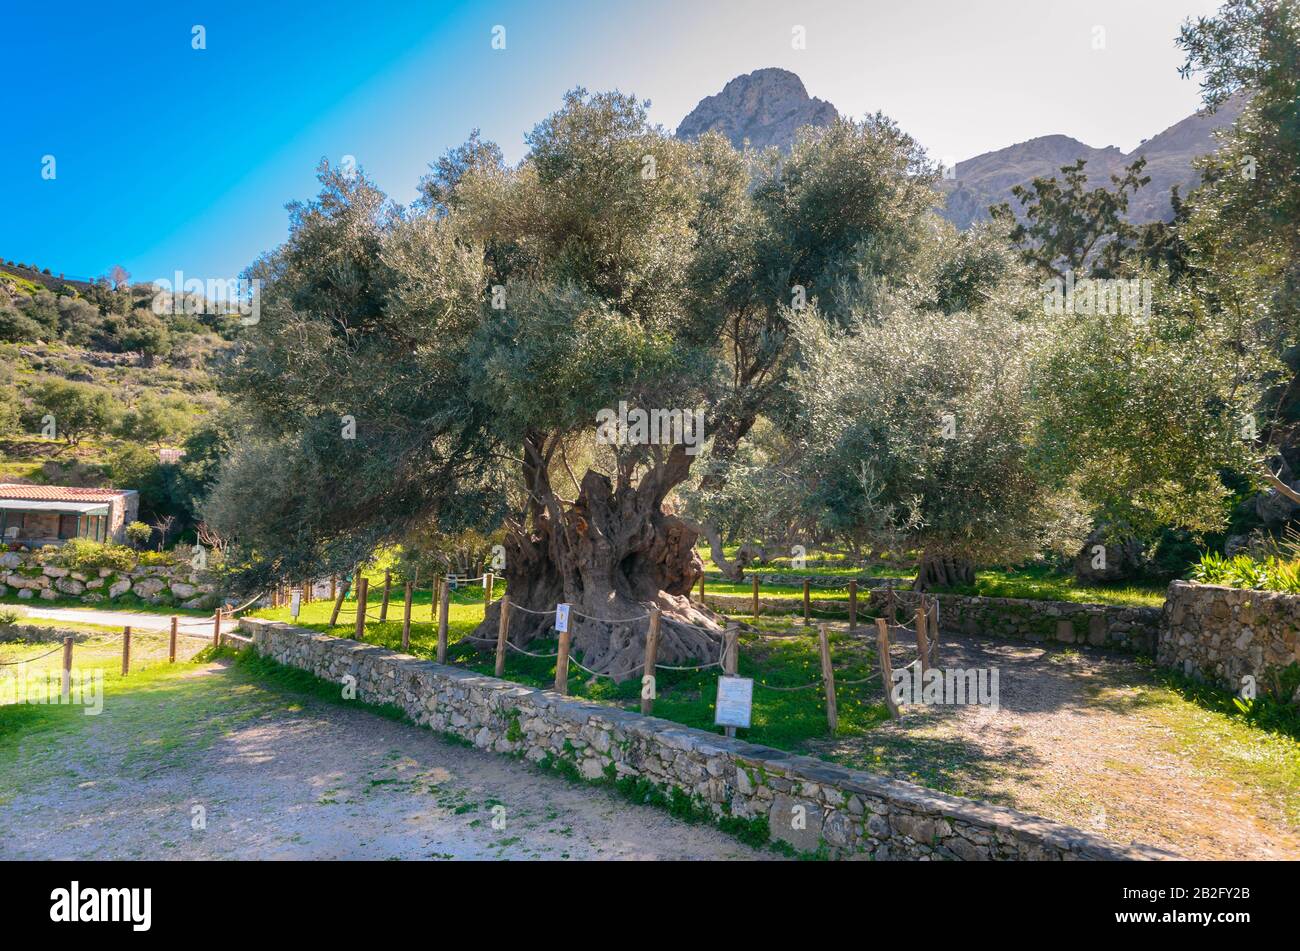 Monumental olive tree in Kavusi.It is a natural monument which is considered to be the oldest olive tree in the world with an age of 3500 years old. Stock Photo